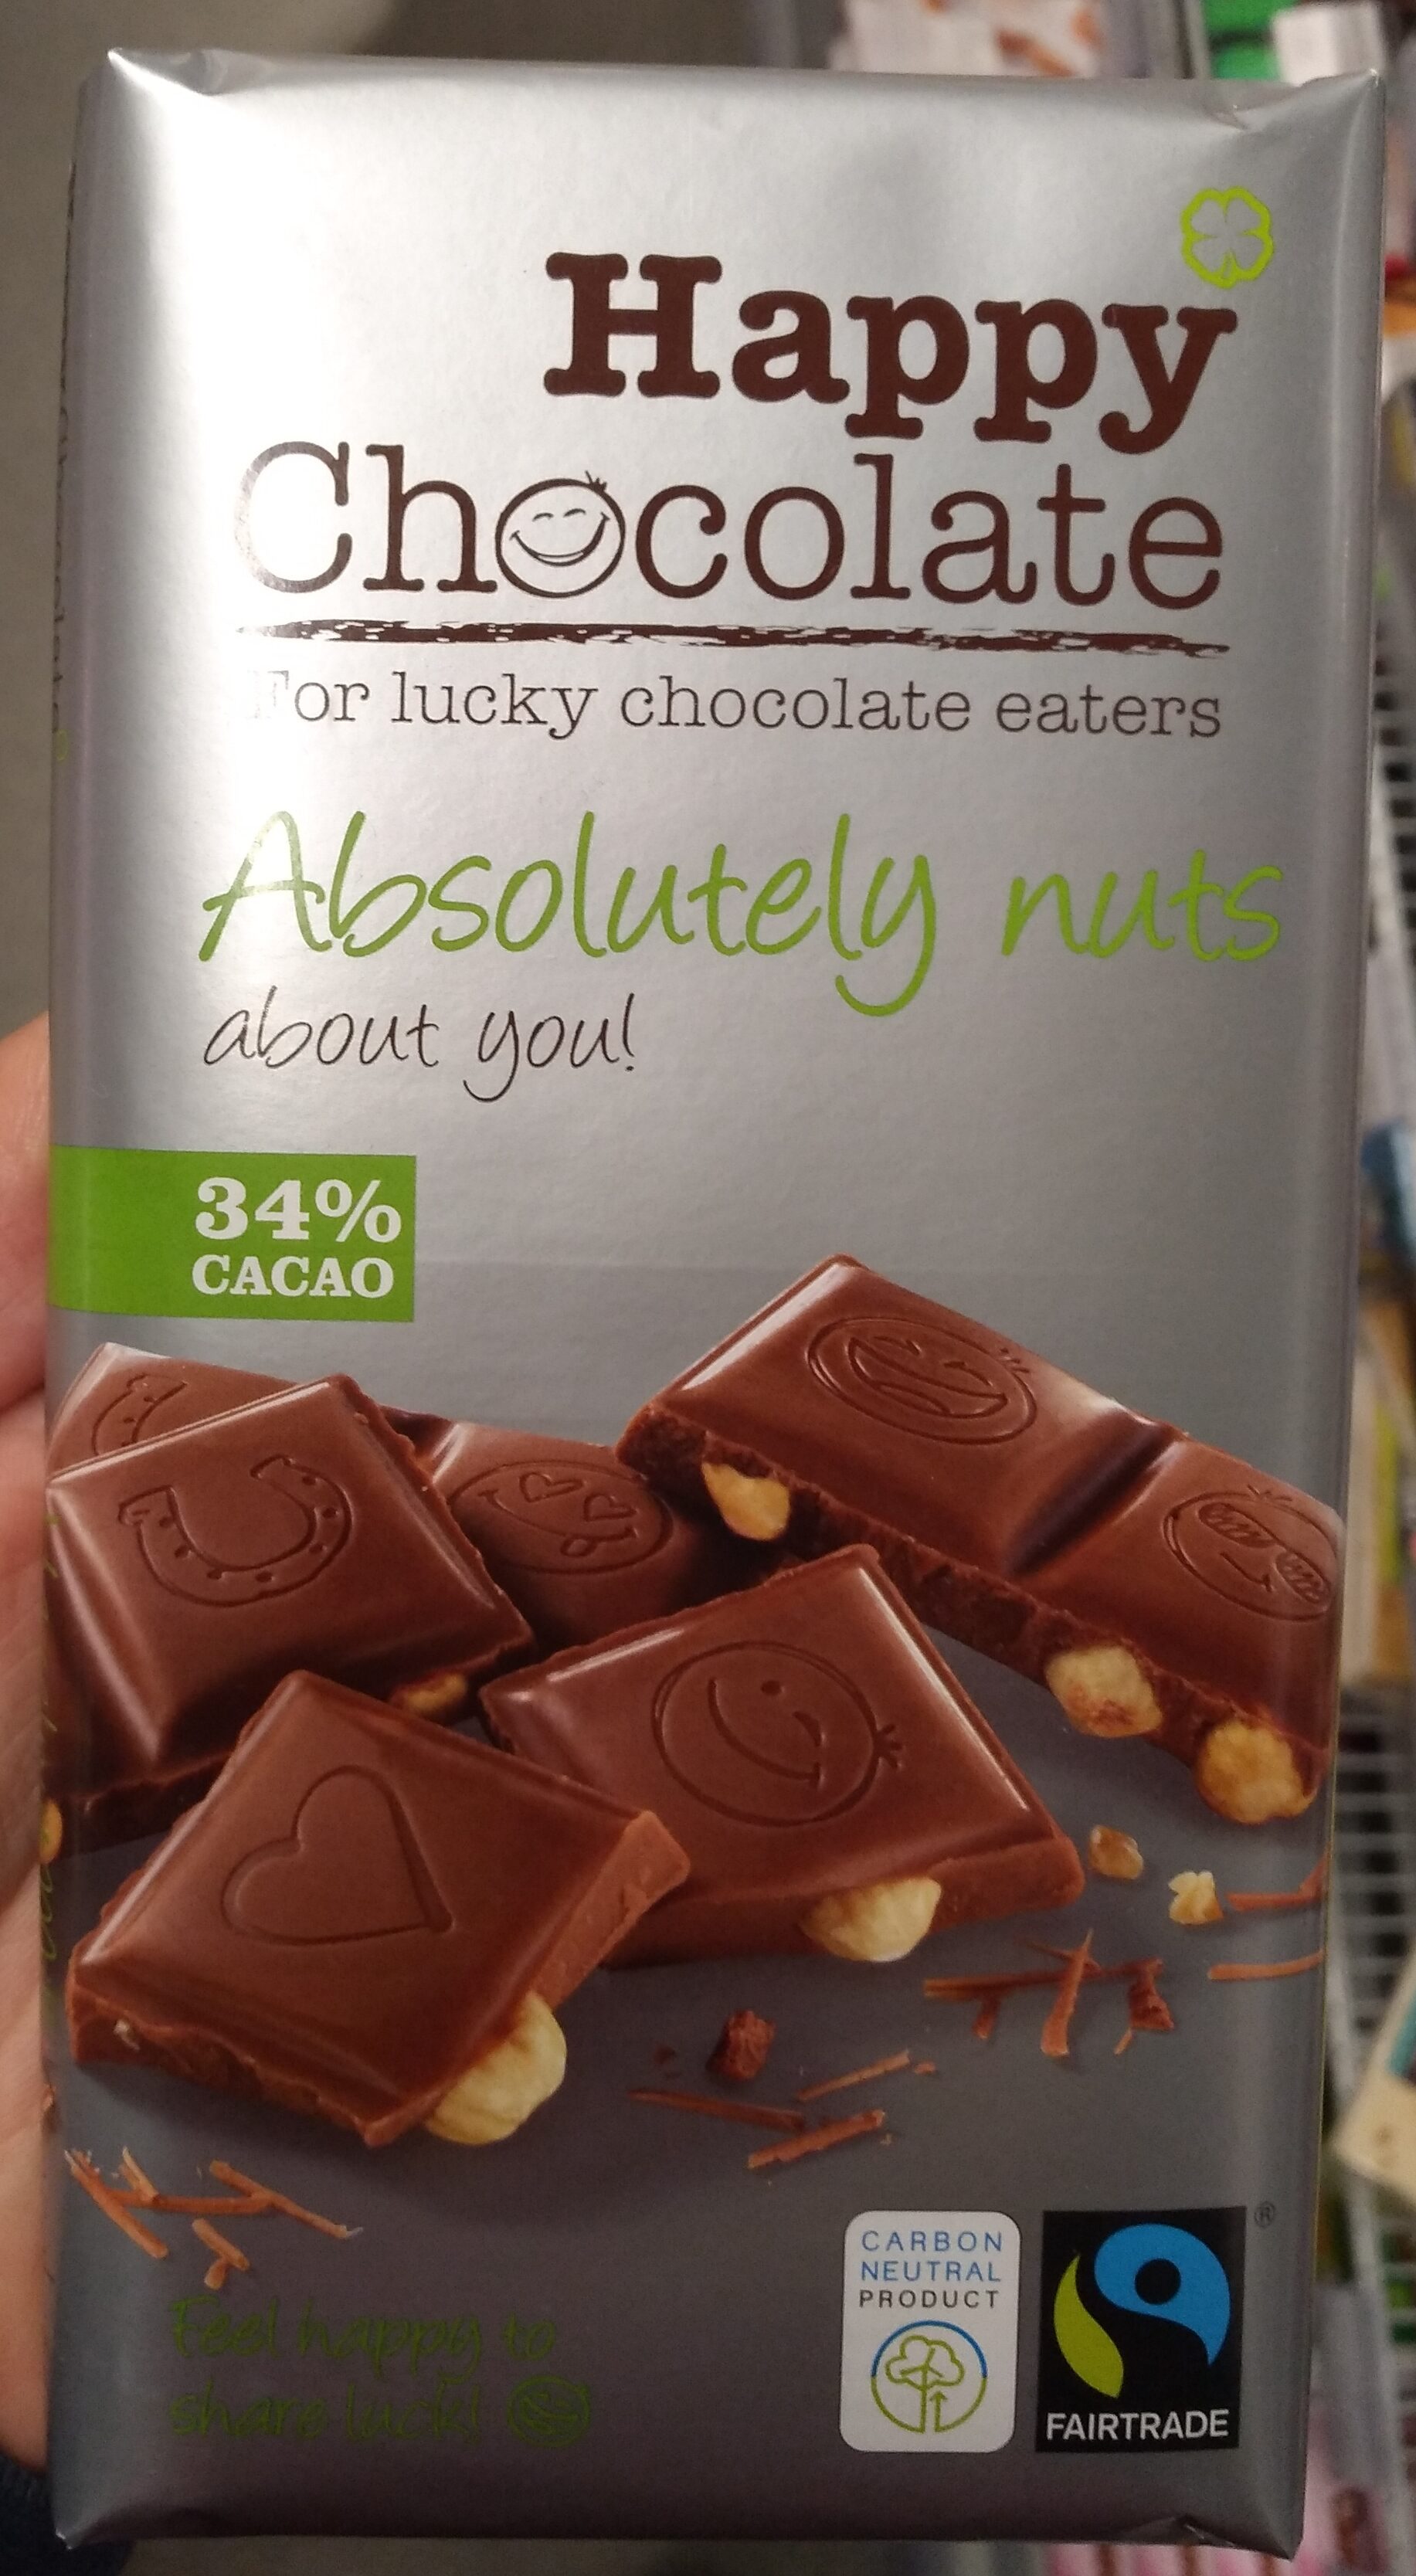 Absolutely nut about you - Product